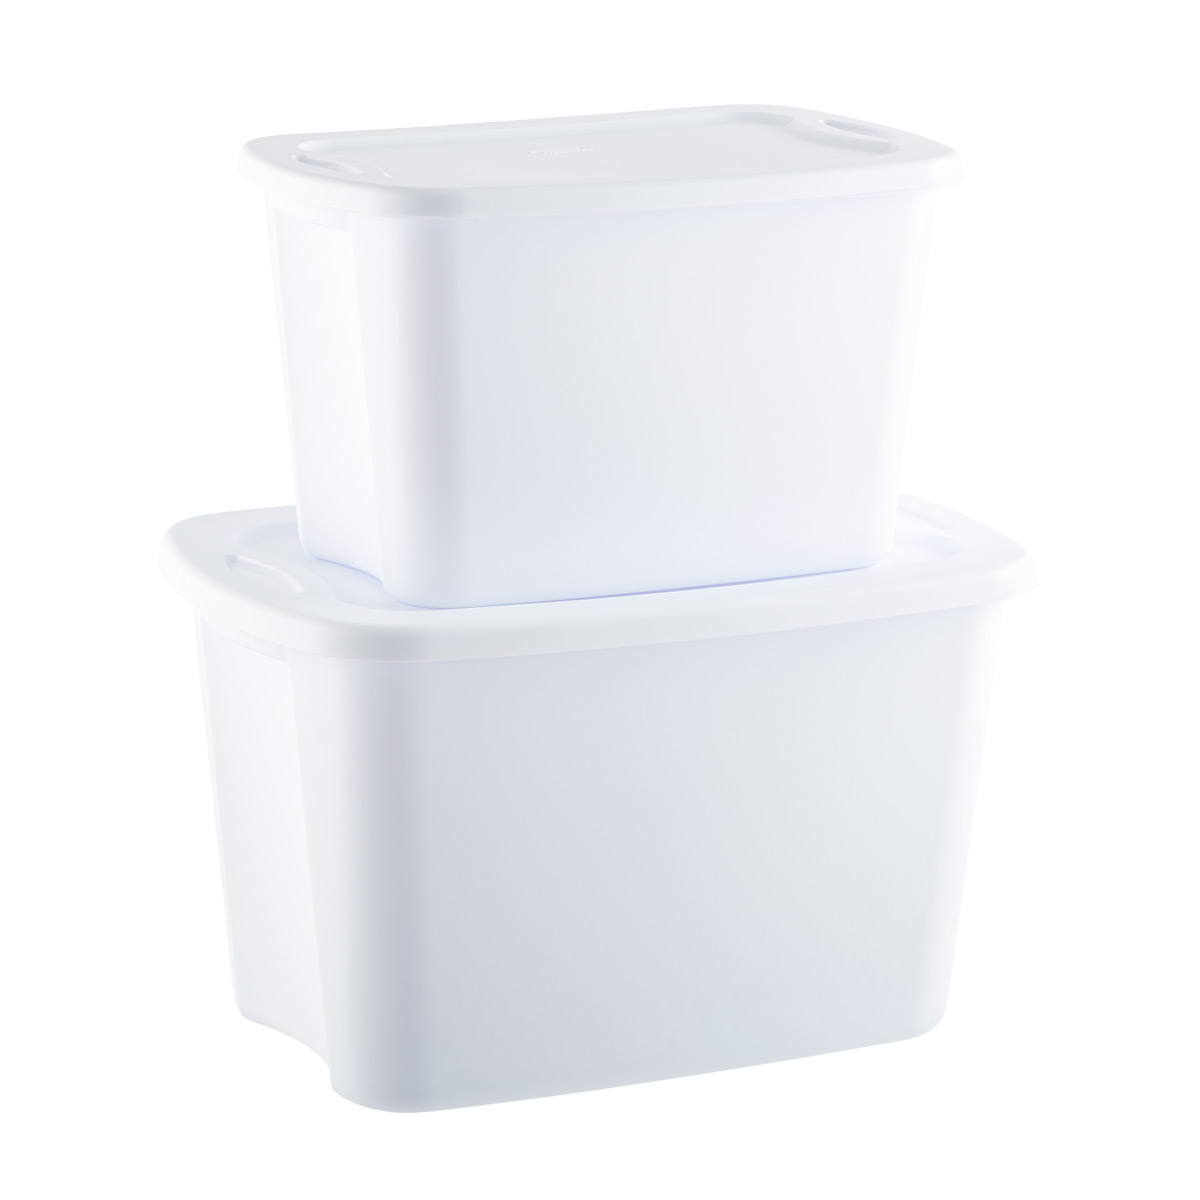 https://www.containerstore.com/catalogimages/462555/10074120-Stacker-Tote-White.jpeg